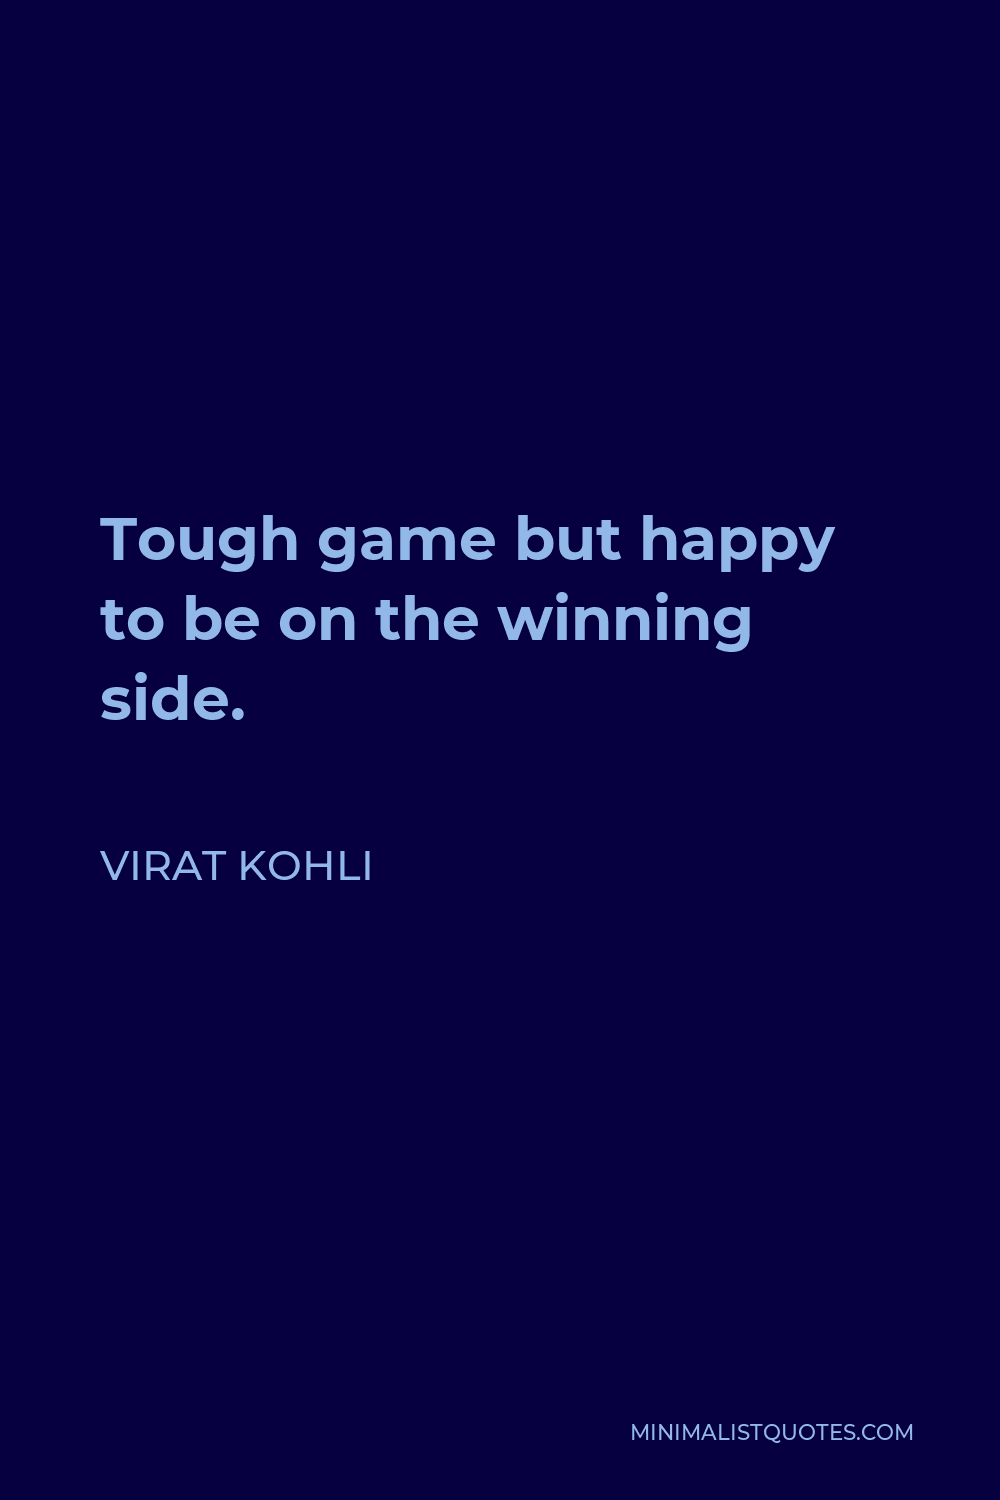 Virat Kohli Quote - Tough game but happy to be on the winning side.